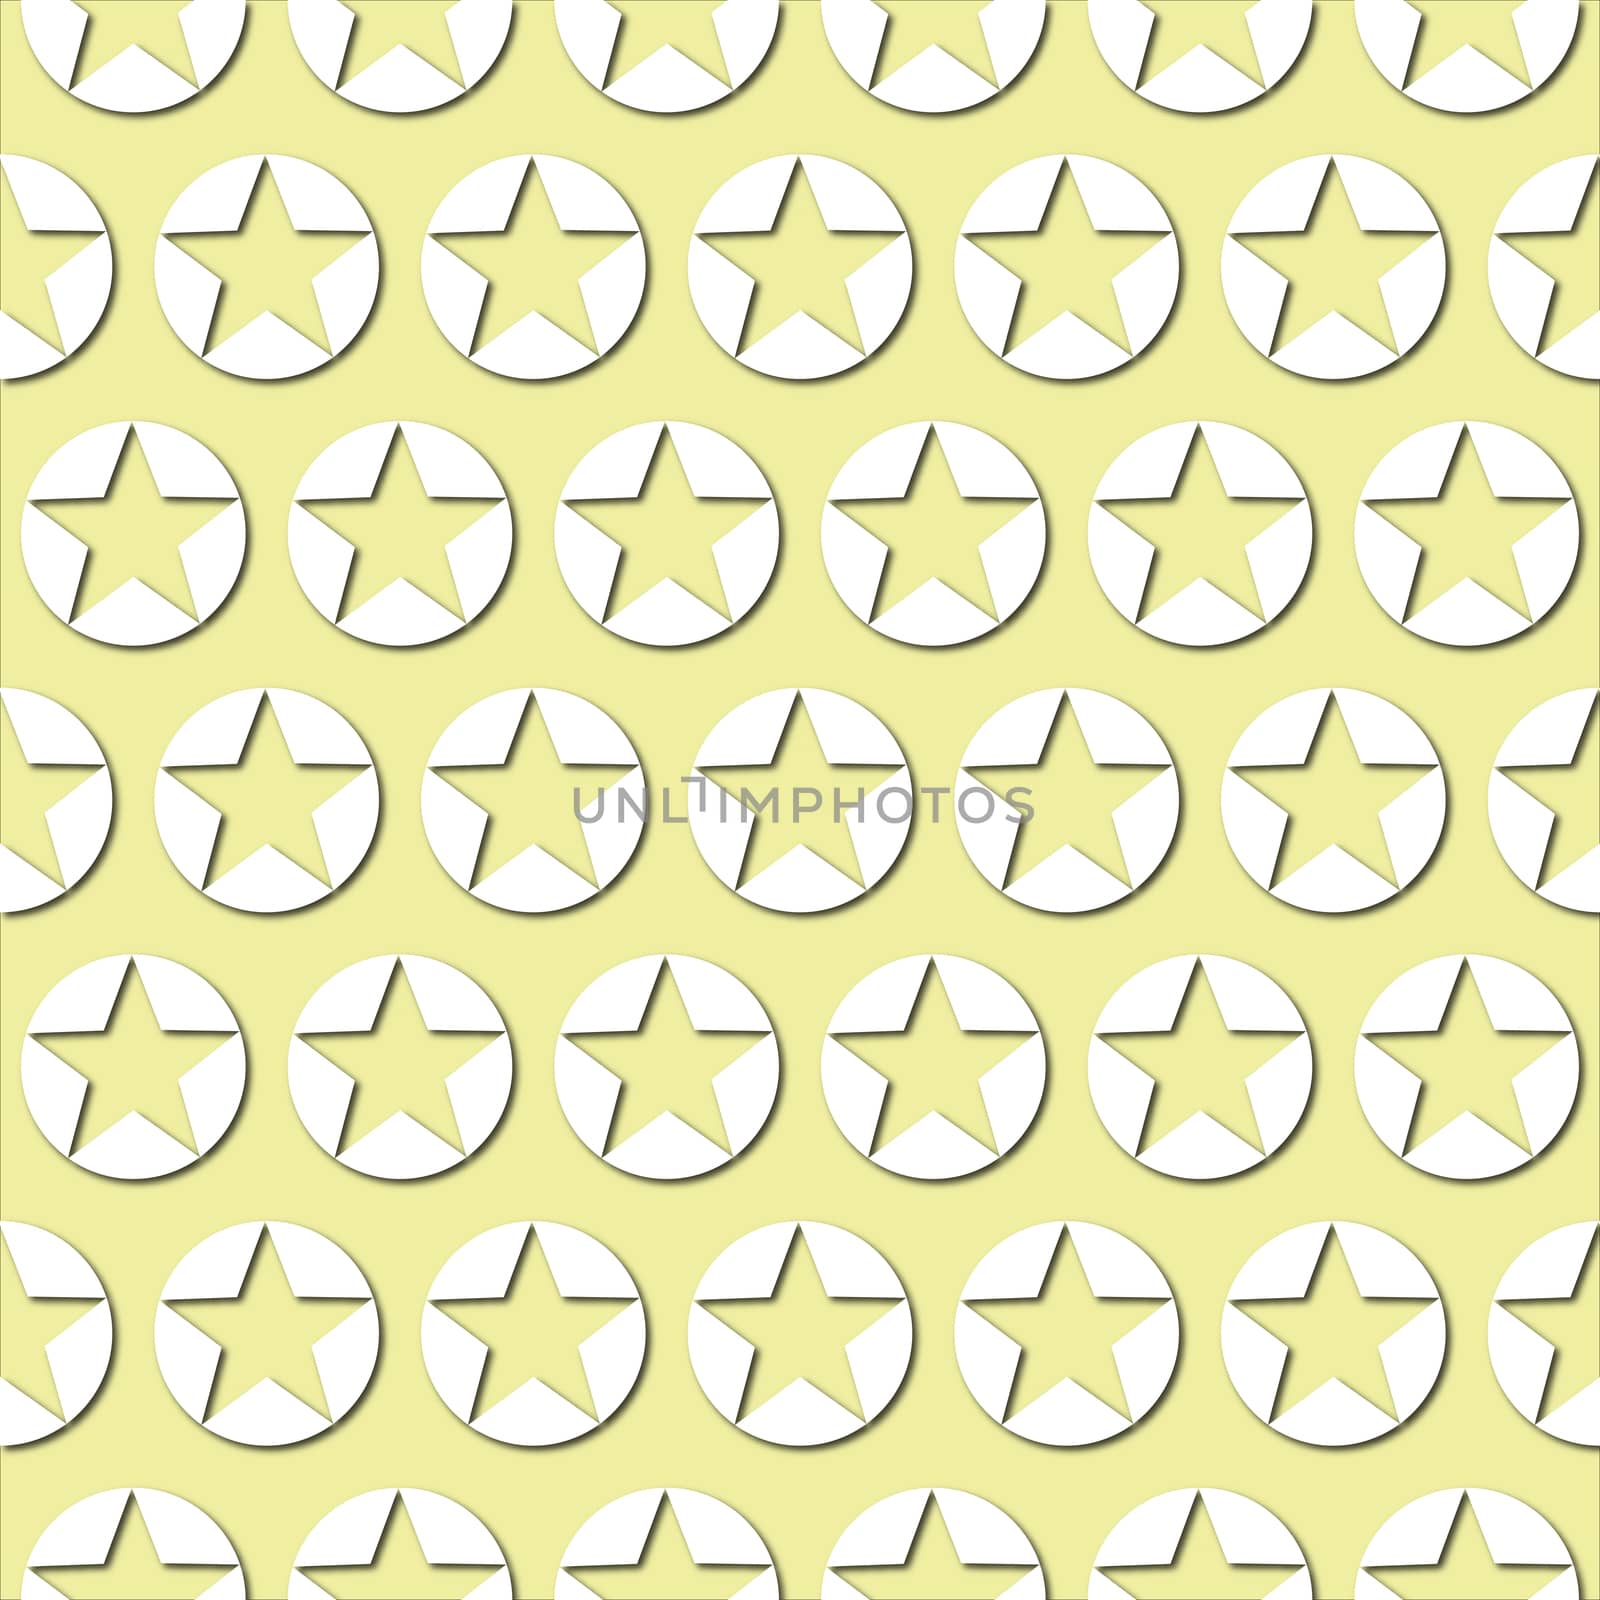 White stars icon on pale green background, seamless pattern. Paper cut style with drop shadows by Pashchenko